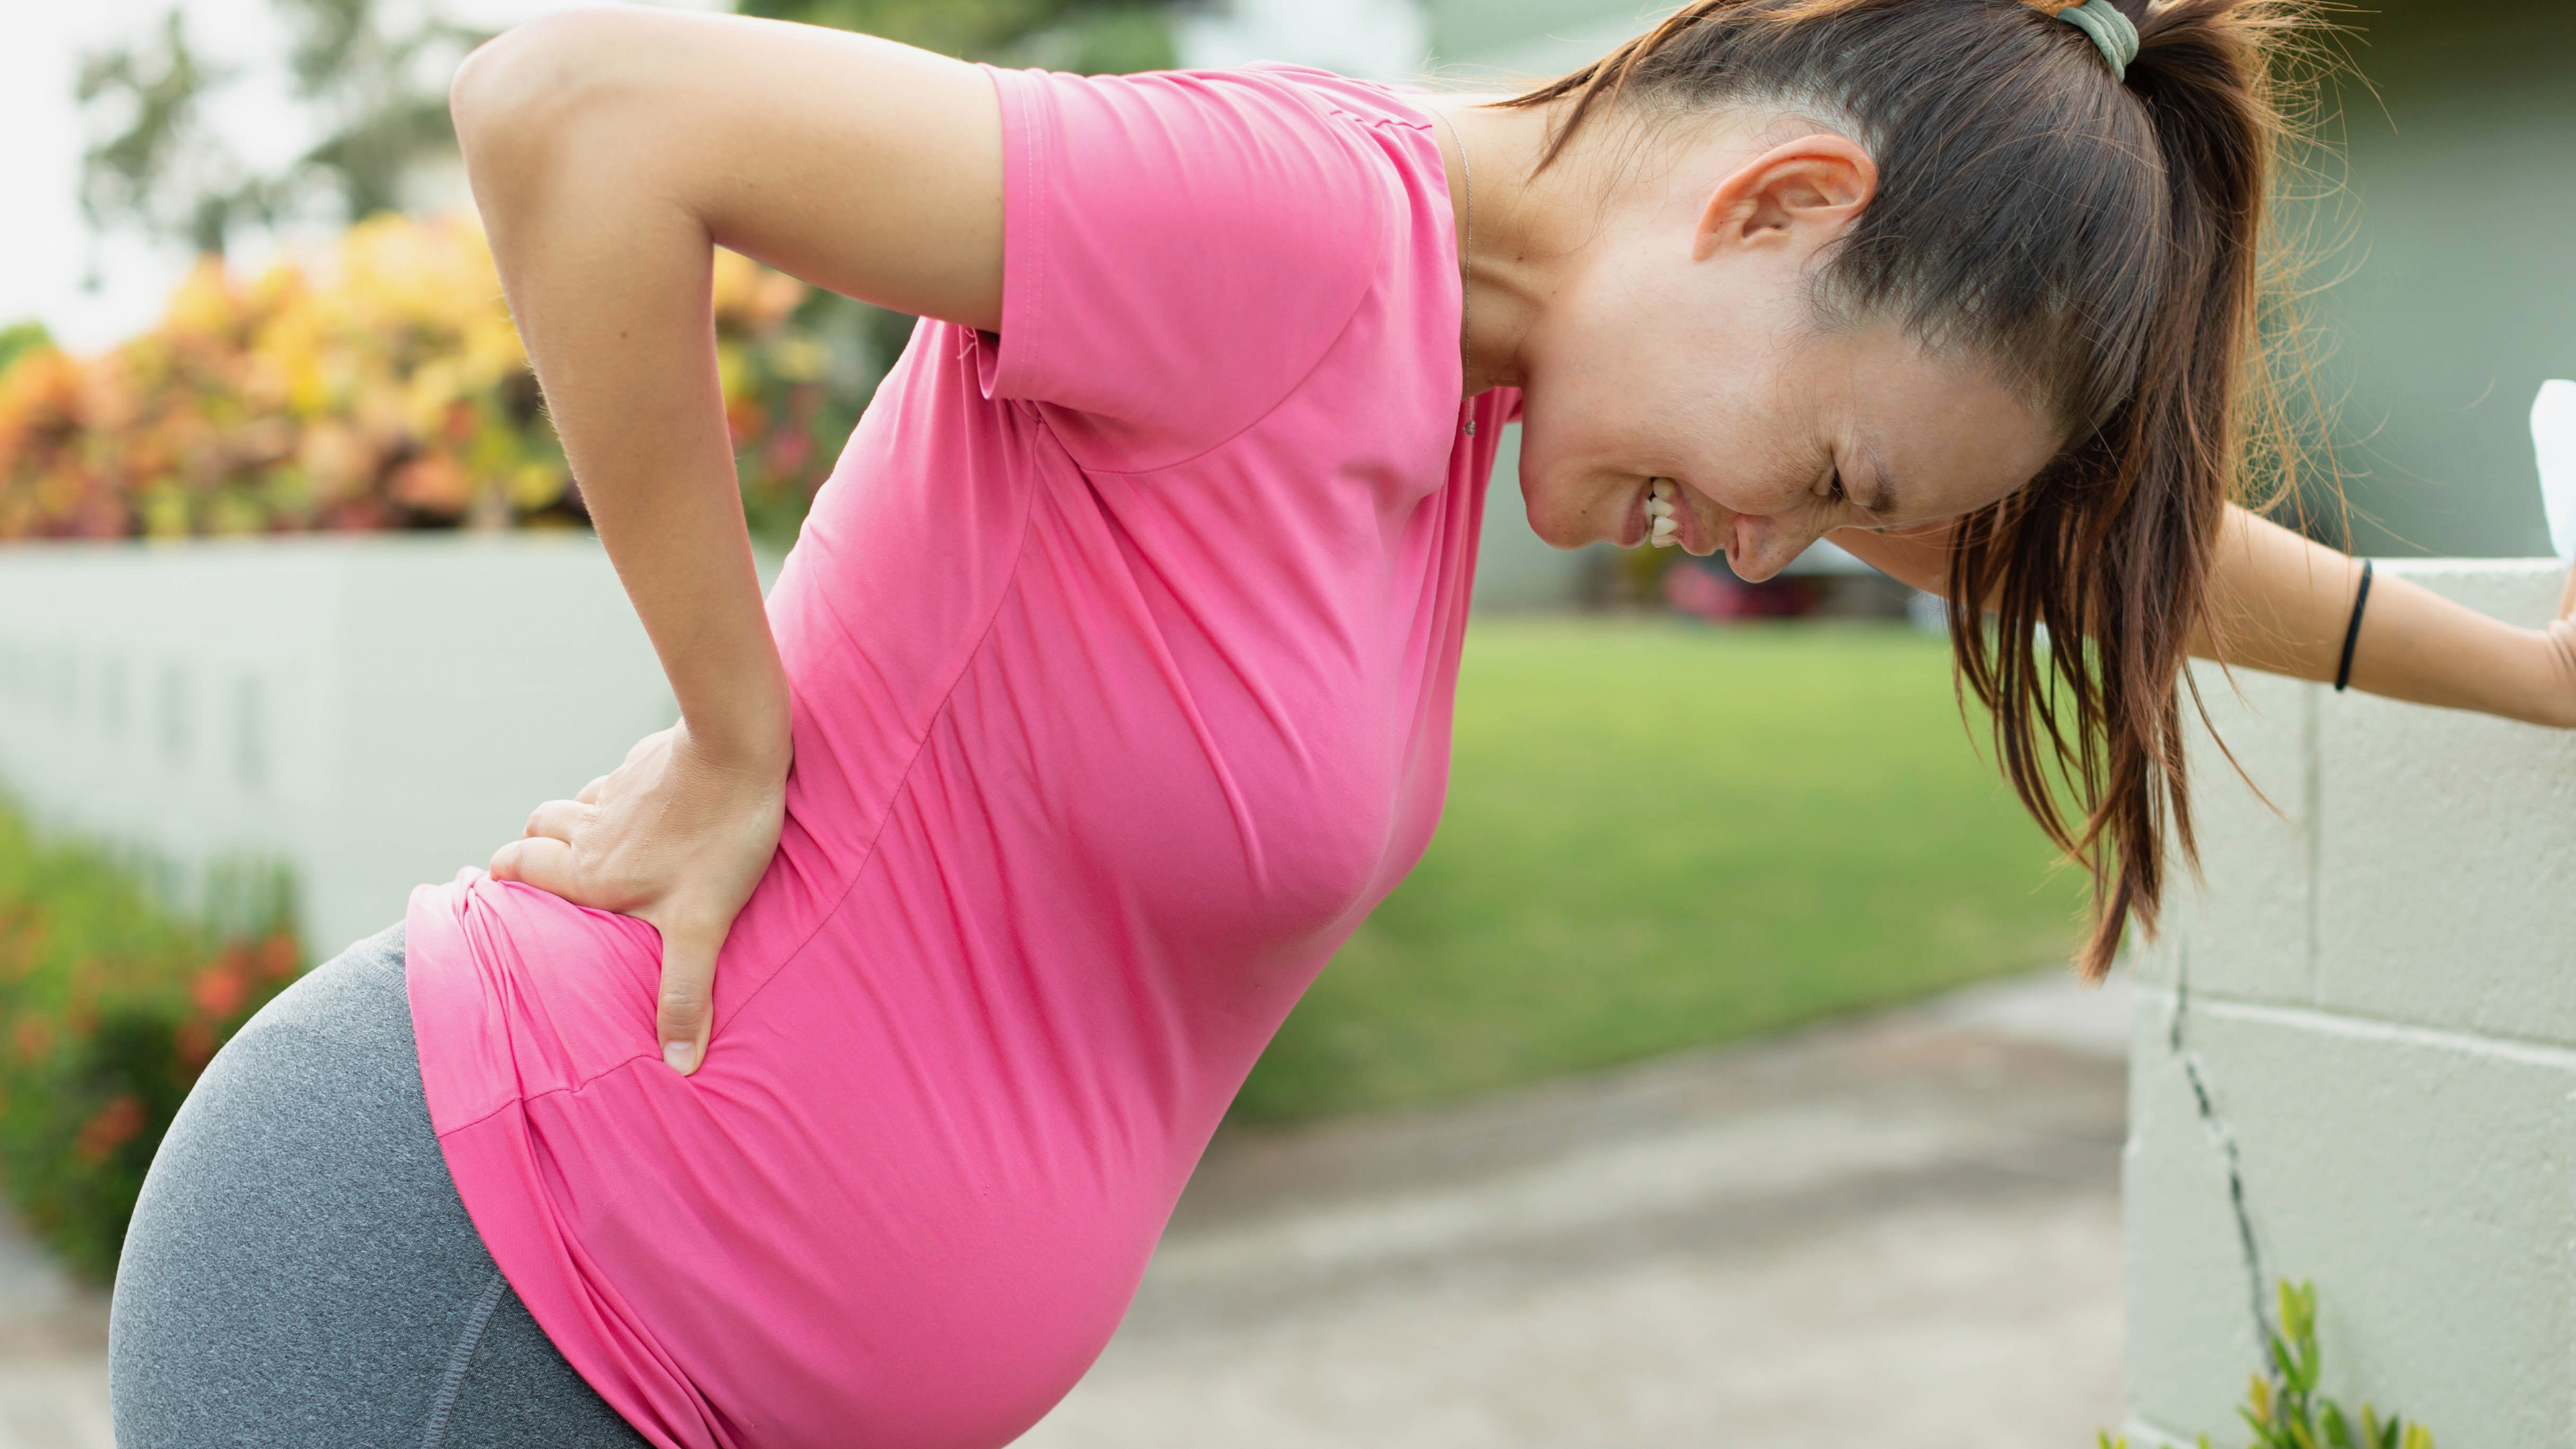 What Exercise Is Not Safe During Pregnancy?